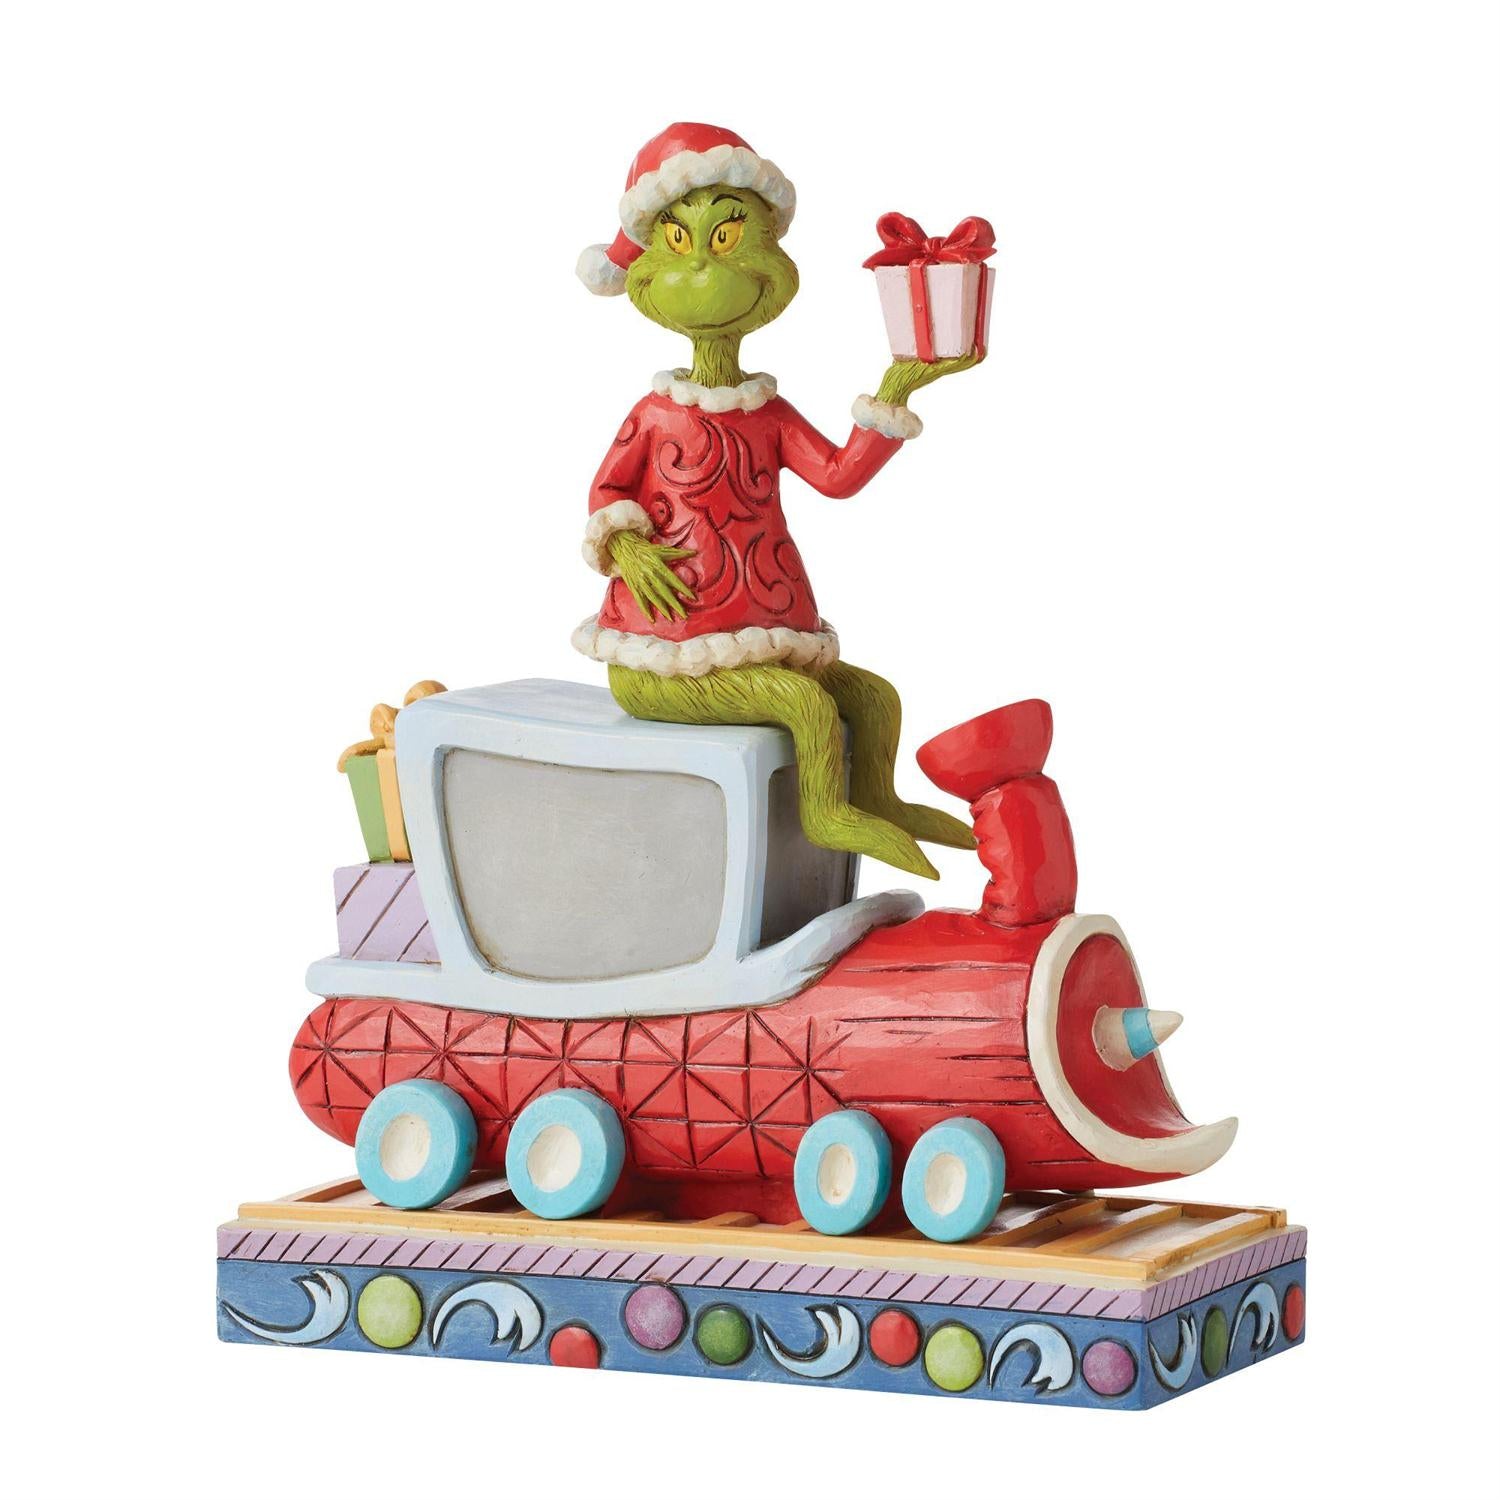 The Grinch on a Train